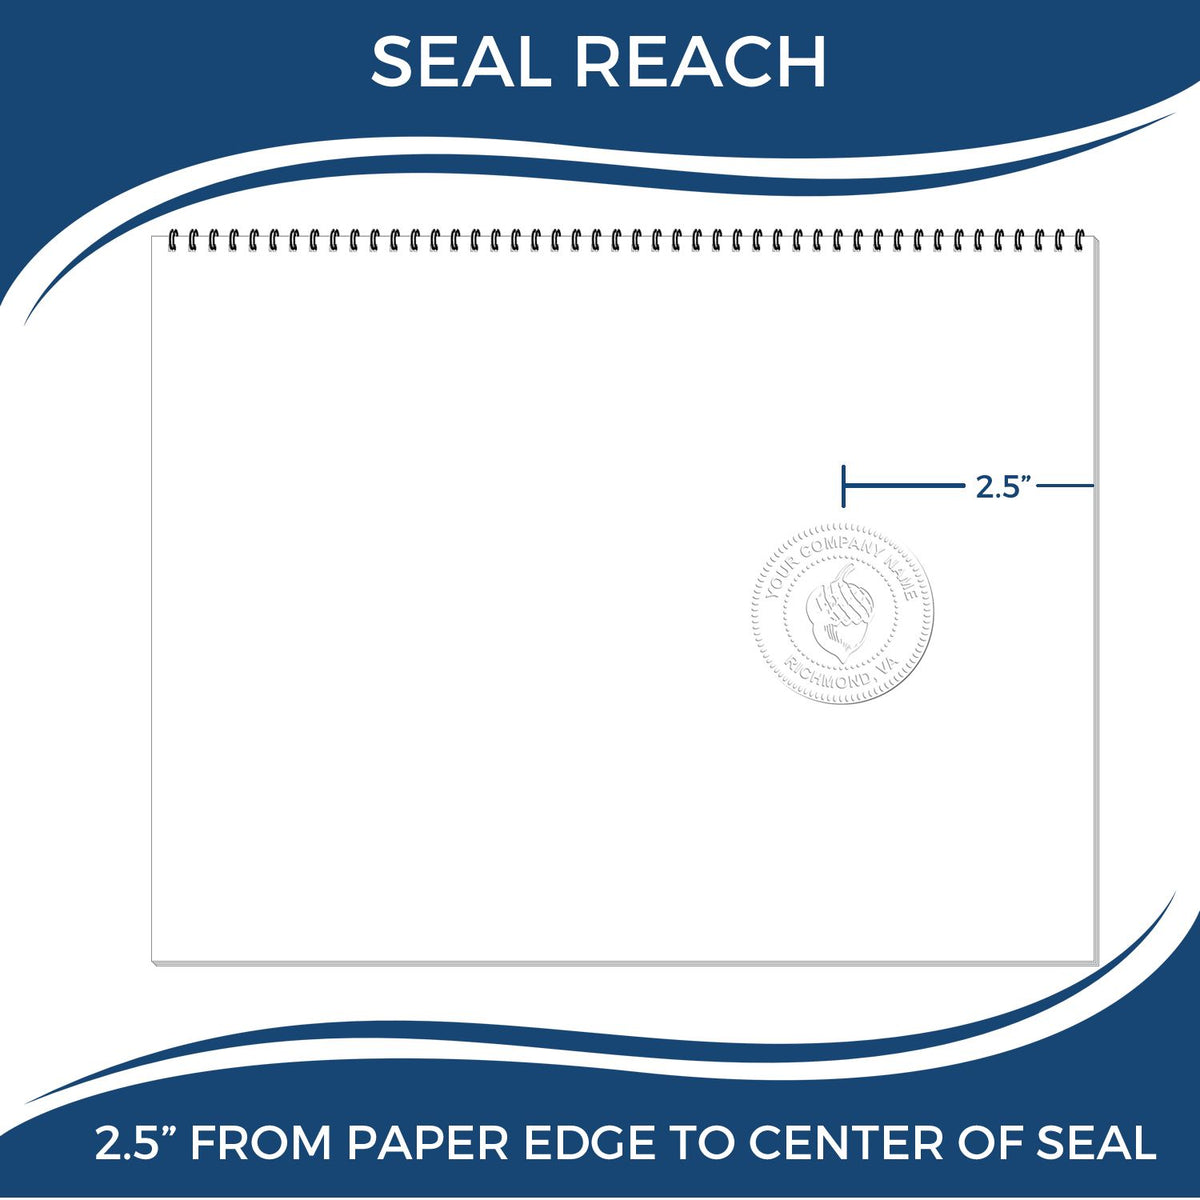 An infographic showing the seal reach which is represented by a ruler and a miniature seal image of the Long Reach Louisiana PE Seal